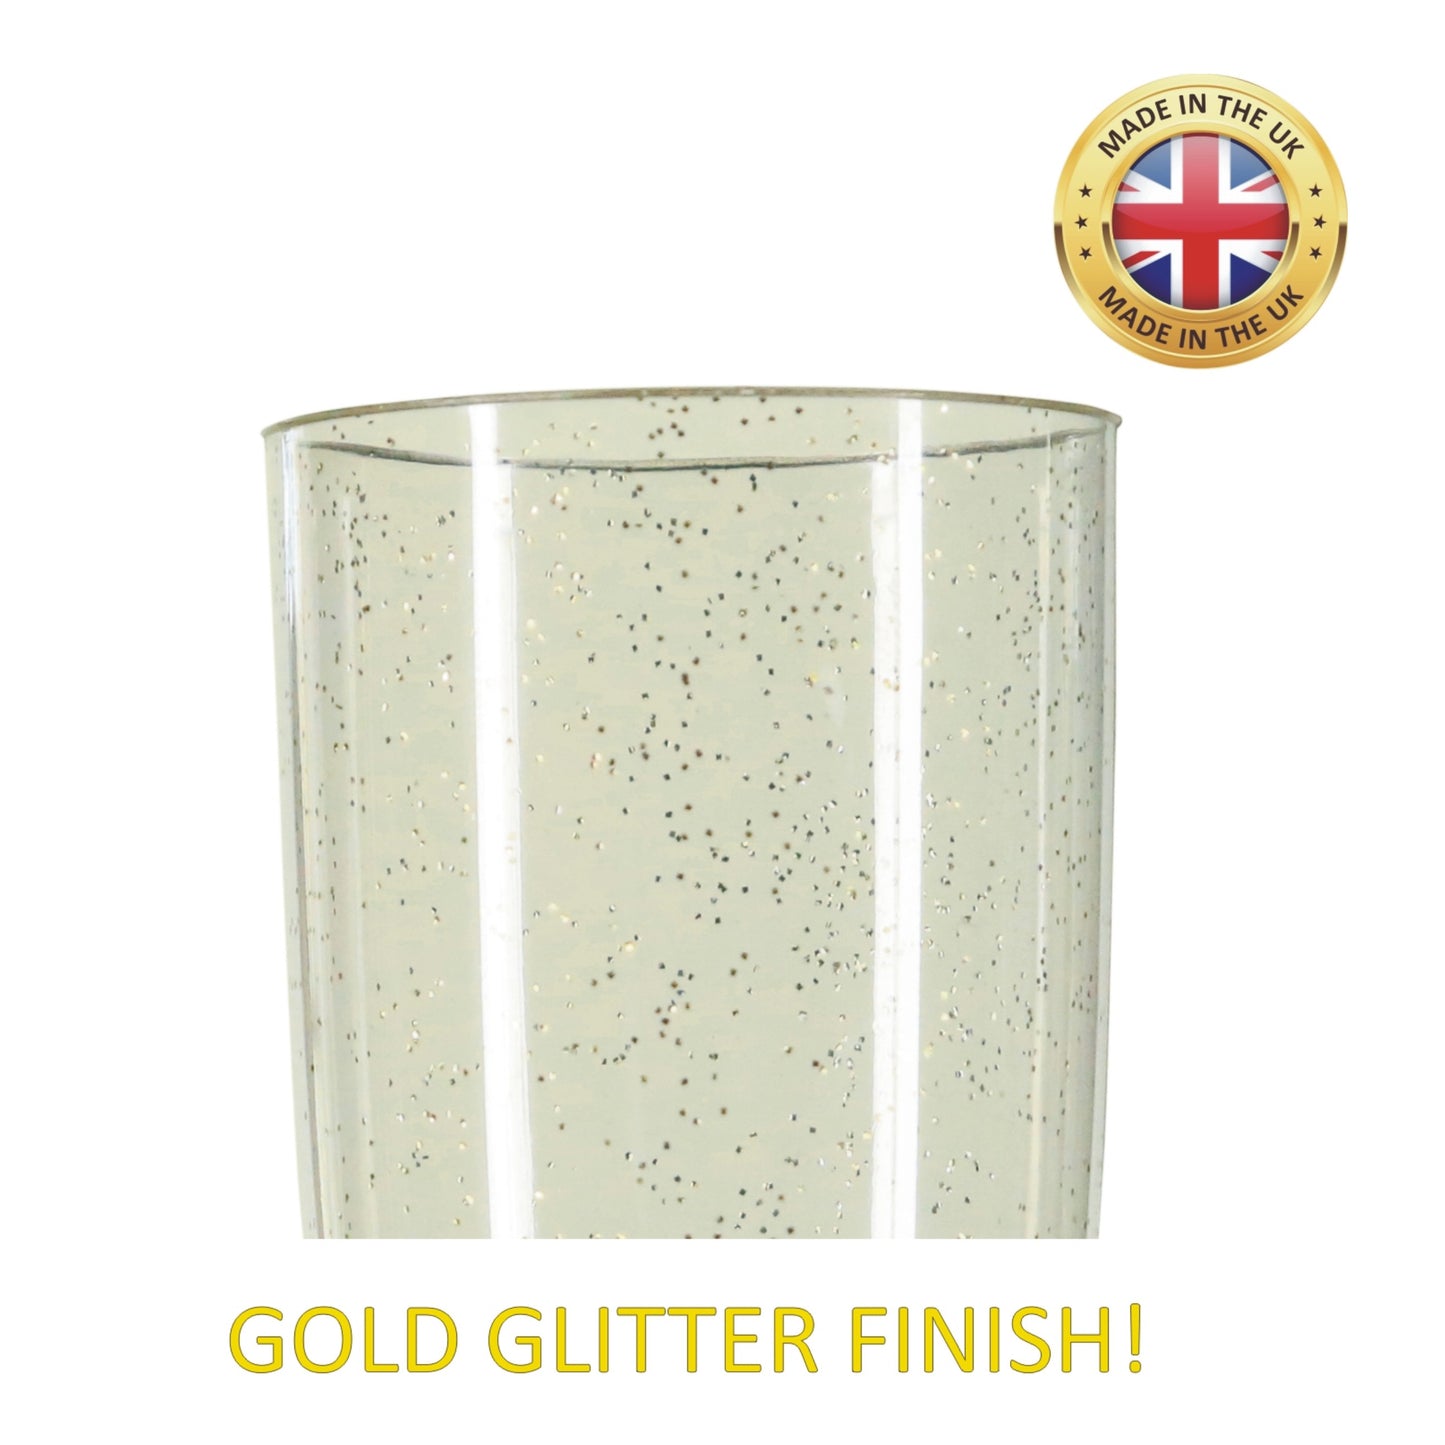 Glitter Party Pack 80 glasses - Gold & Silver Glitter Champagne flutes and reusable shot glasses-EY-PP-044-Product Pro-Champagne/Prosecco Flutes, Shot Glasses